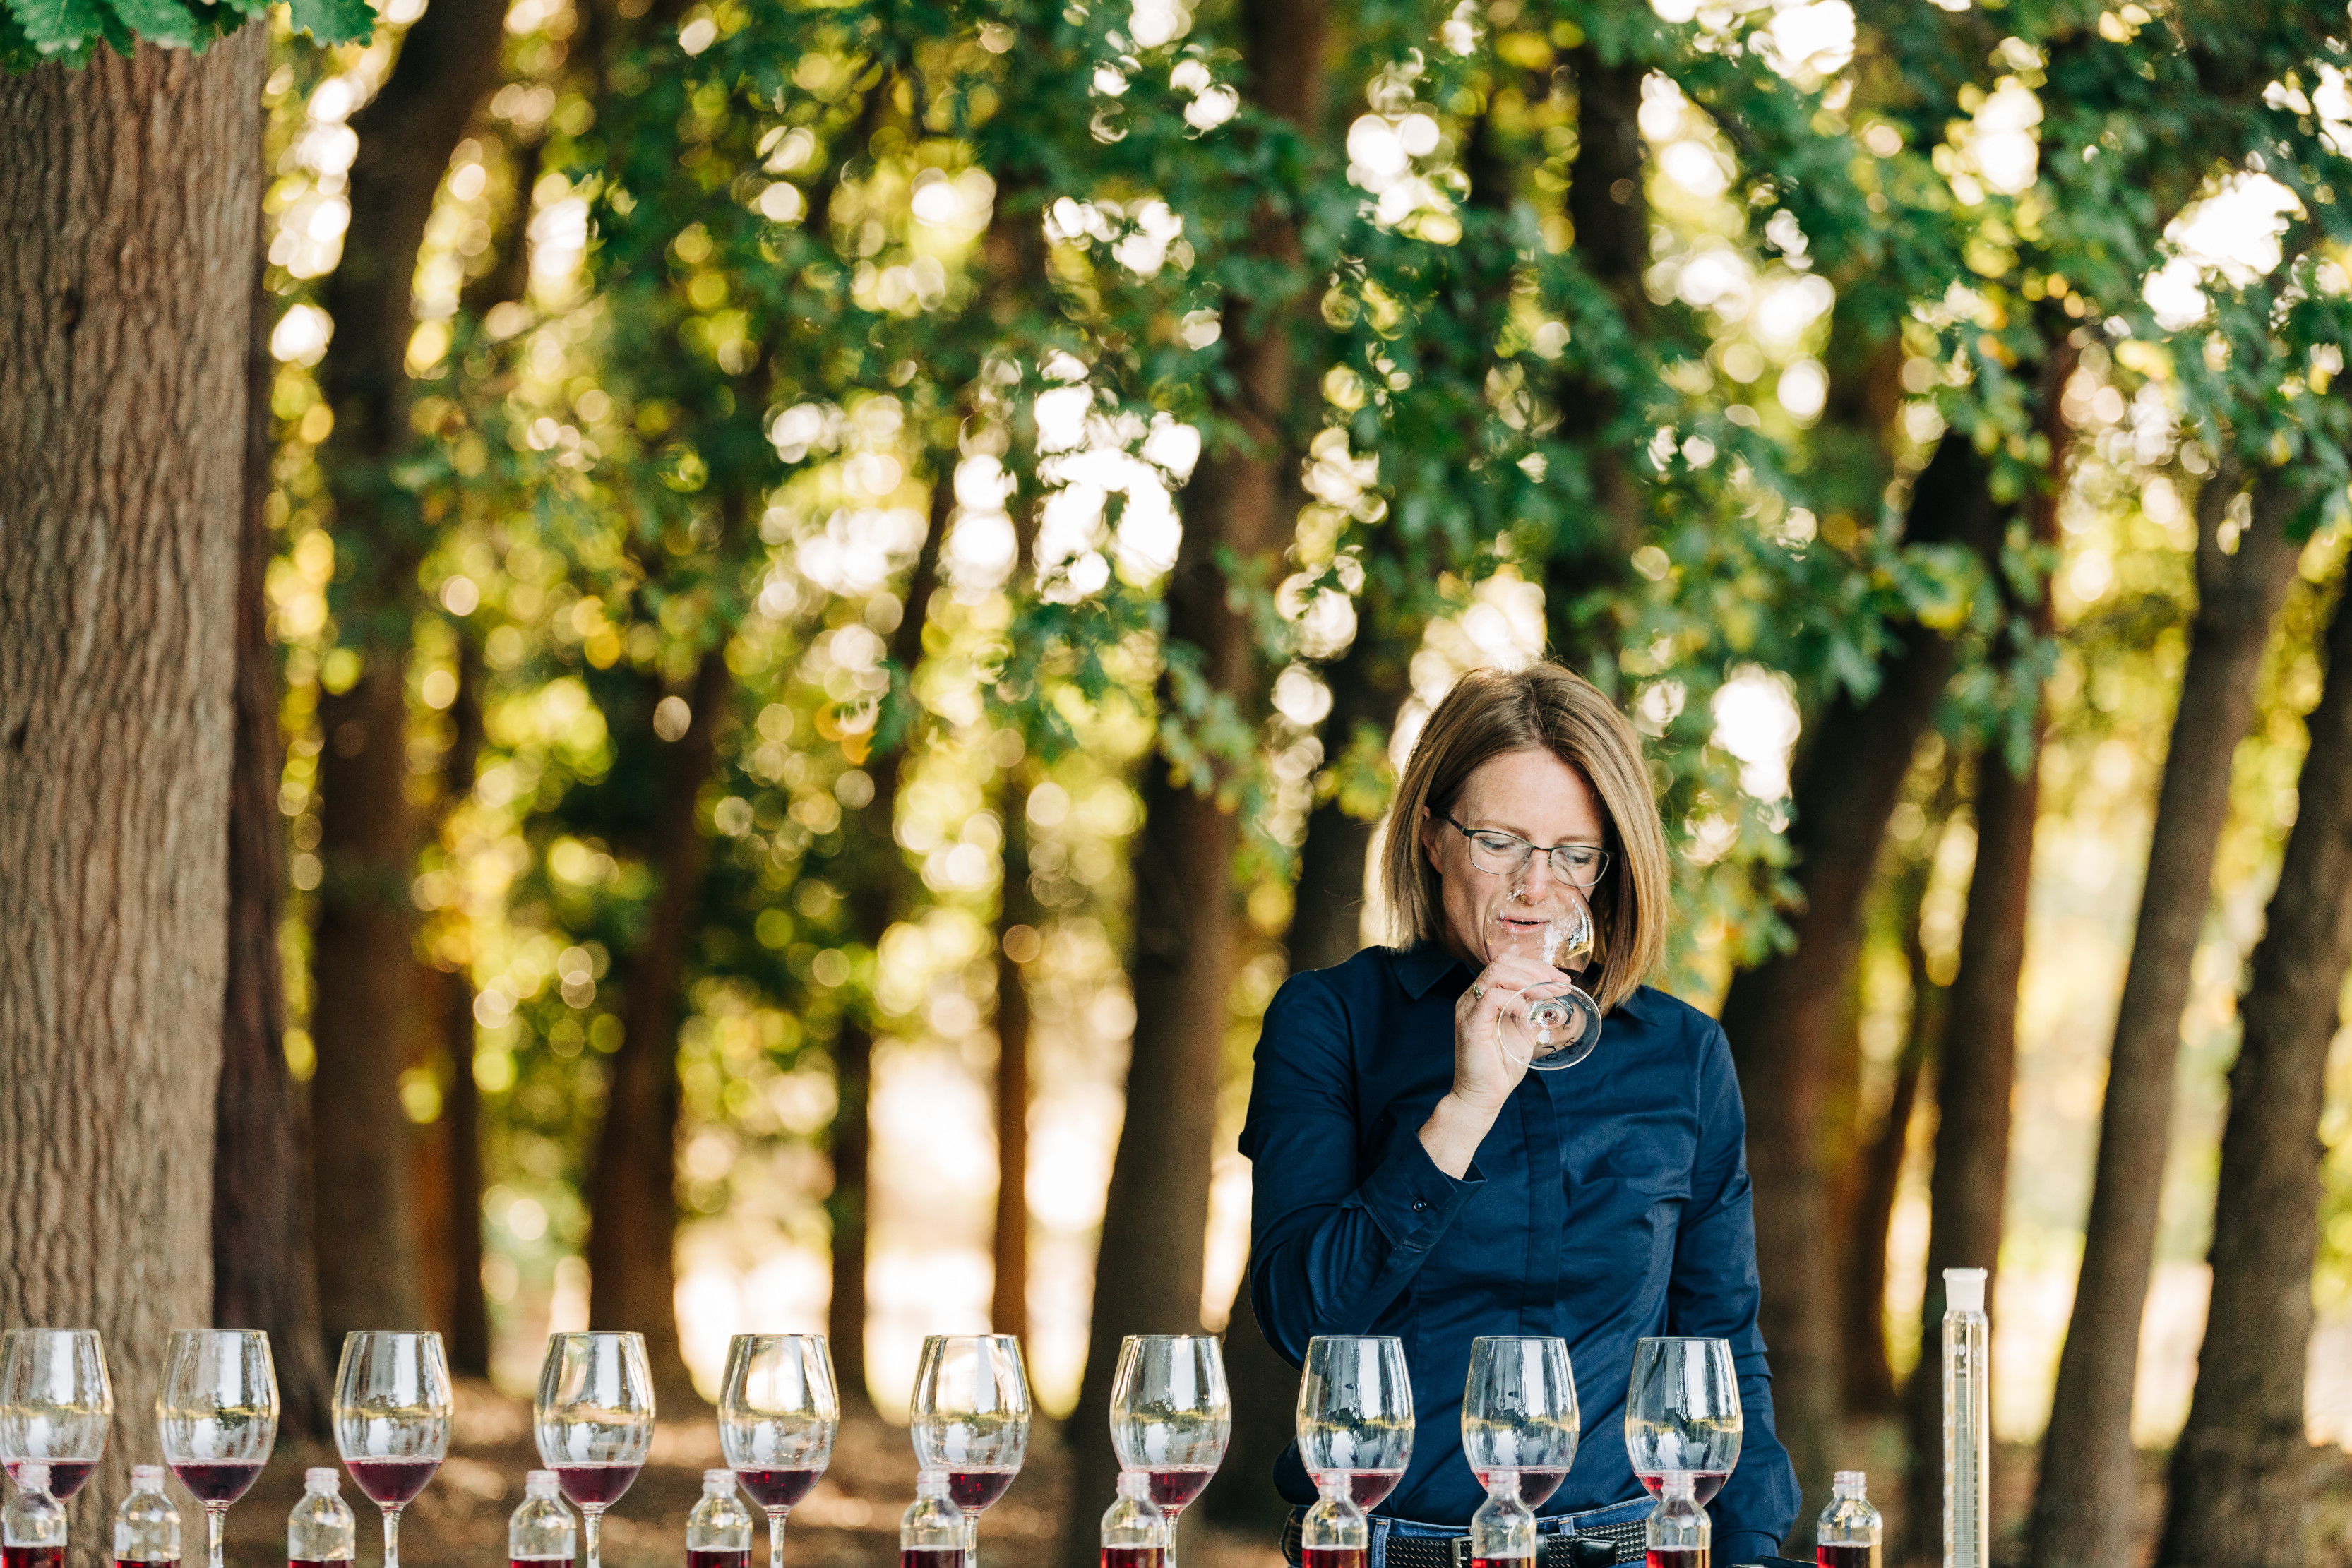 10 glasses of red wine are placed in a row outdoors at Holm Oak Vineyards wine tasting. A woman tastes wine from one glass.